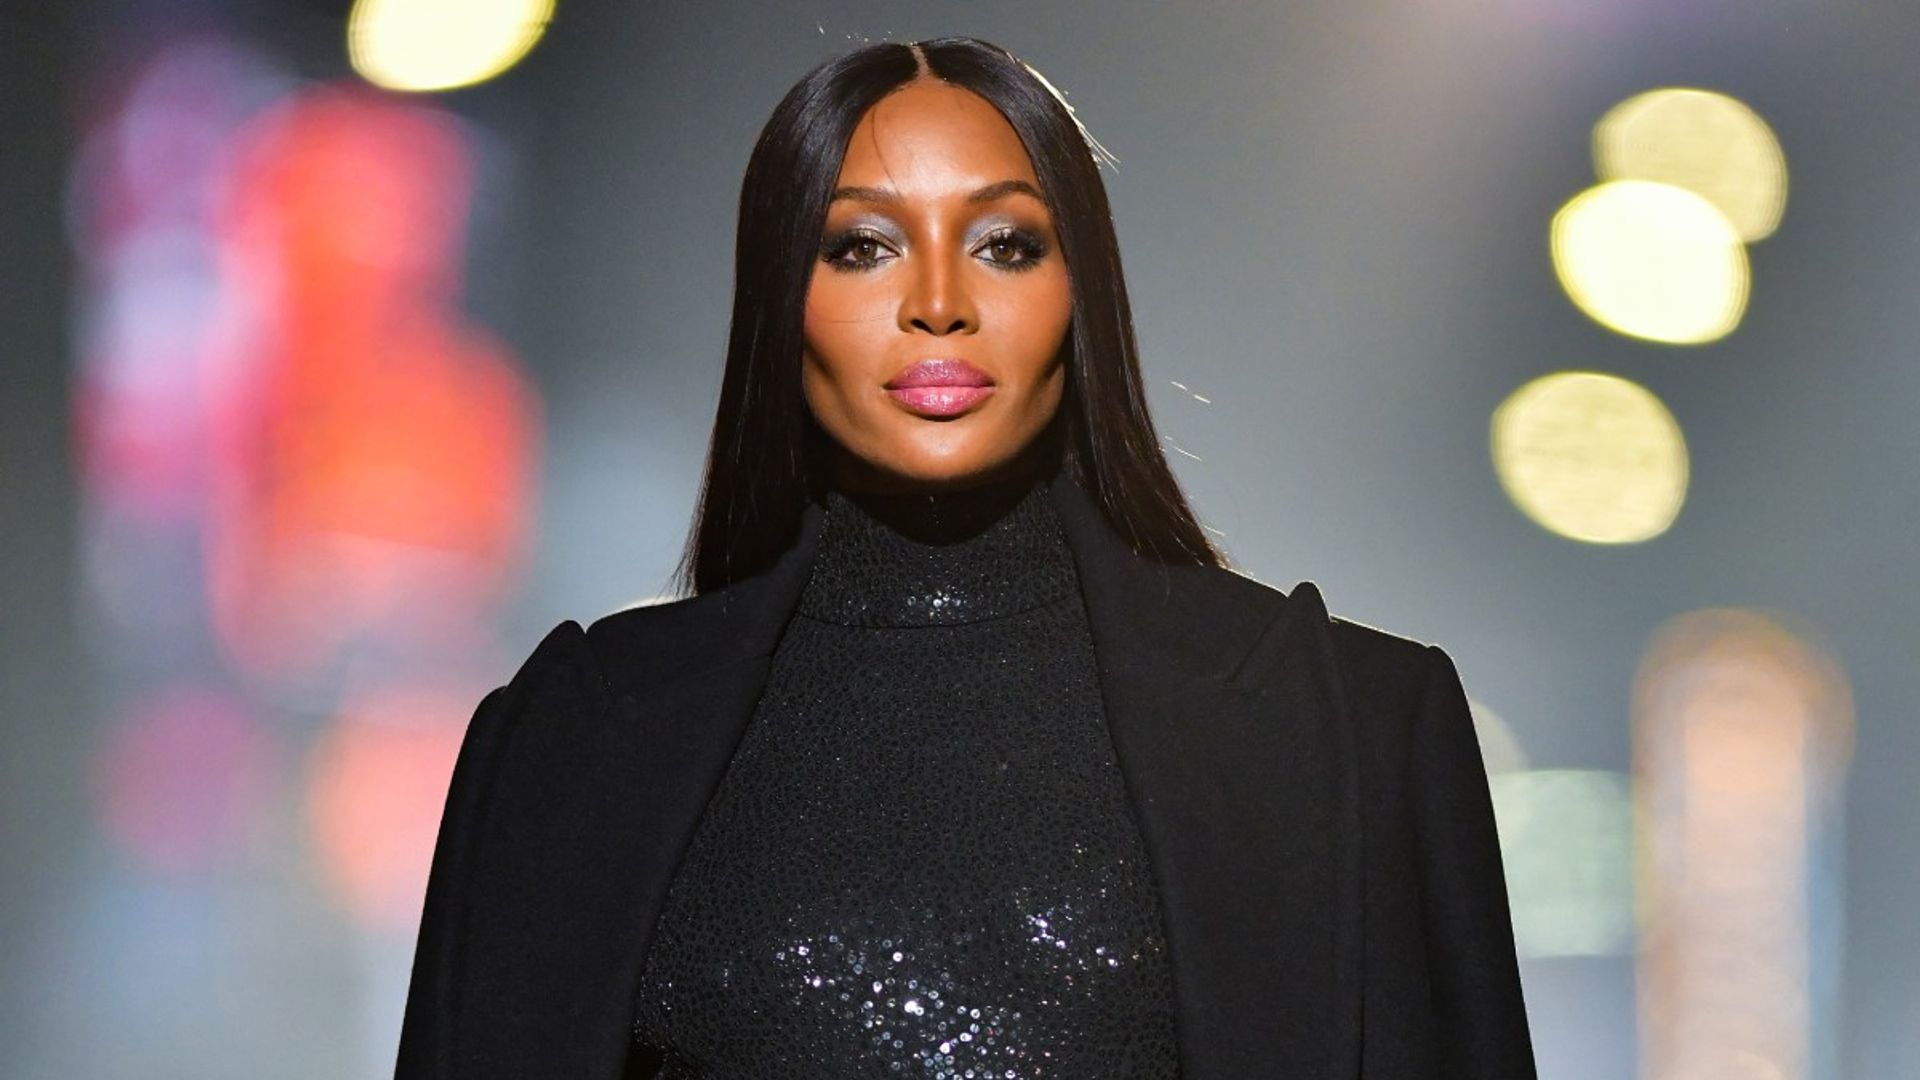 Naomi Campbell enjoys mocktail during day out following baby daughter’s arrival